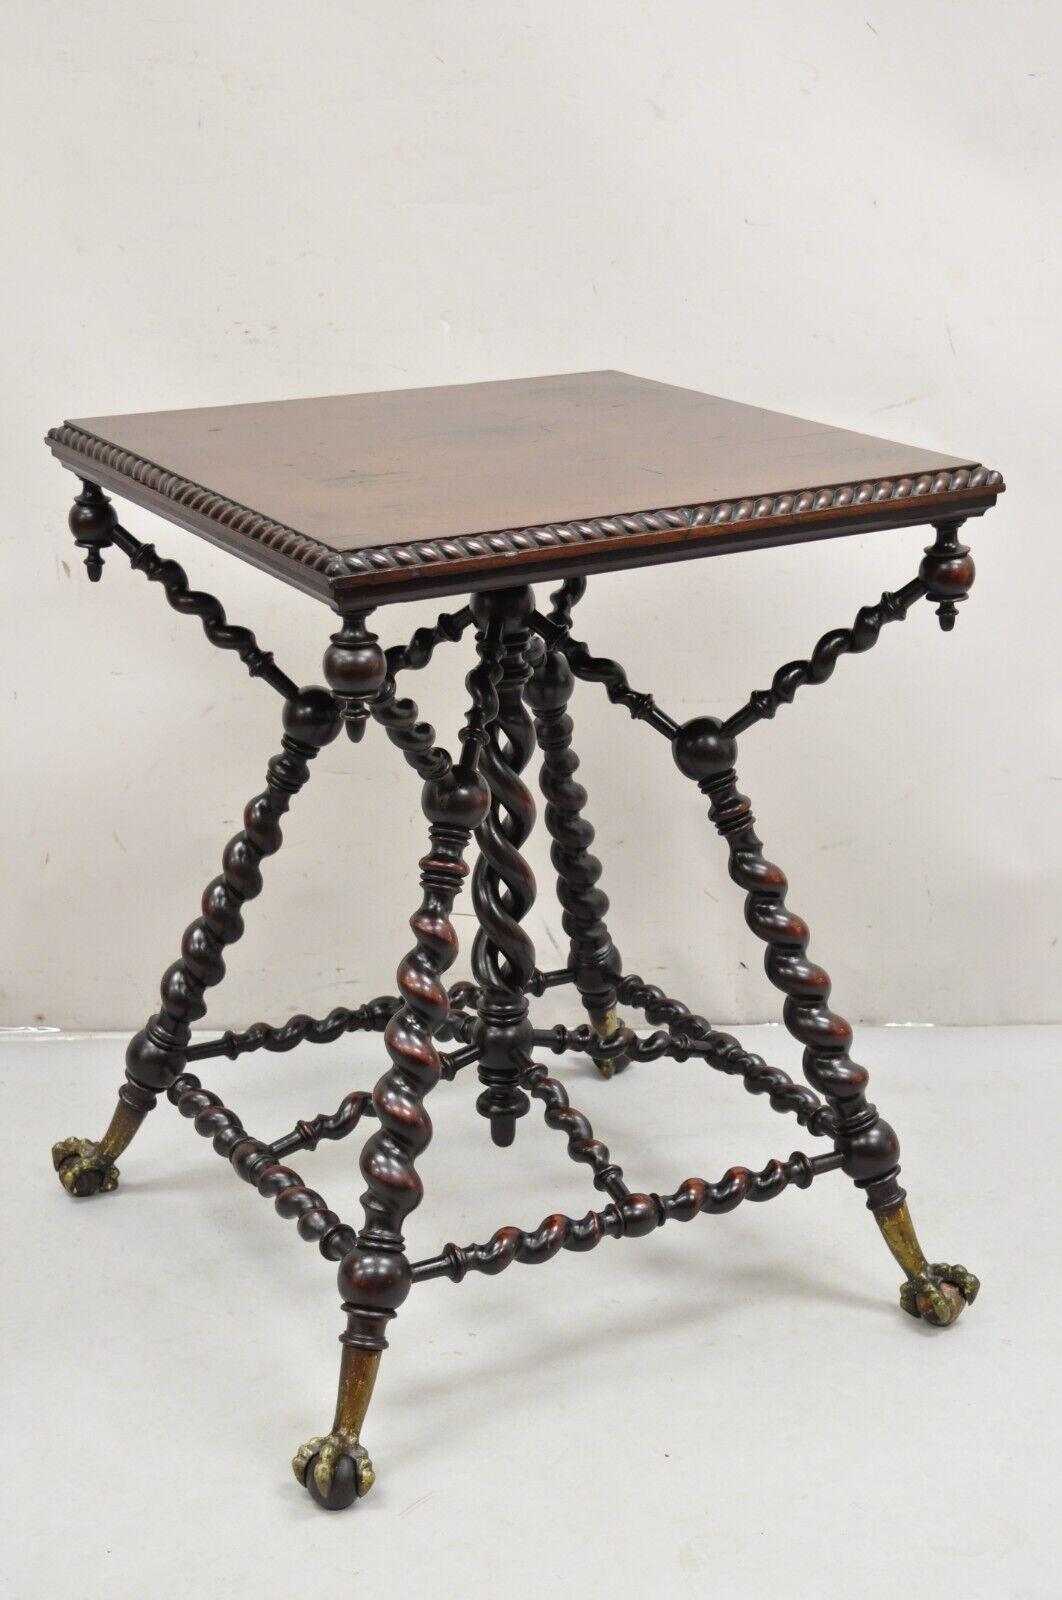 Antique Merklen Brothers Victorian Barley Twist Mahogany Occasional Parlor Table. Item featured is a very rare model with more dramatic barley twist legs and stretchers, ball and claw feet, carved roped edge, pointed finials, 